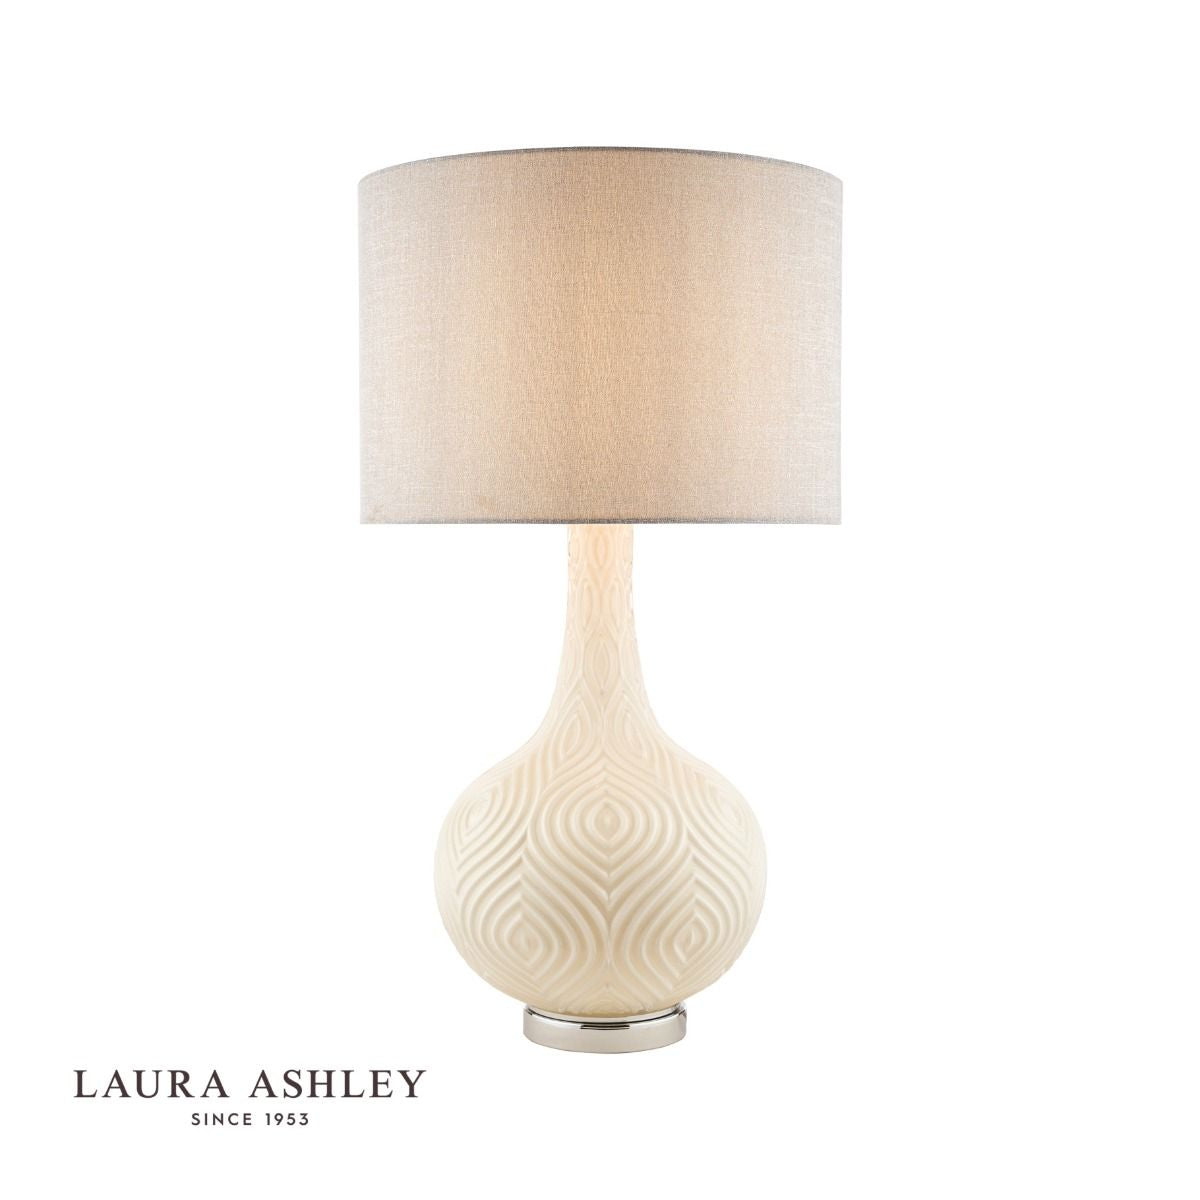 Laura Ashley Grace Painted Patterned Glass LA3742272-Q   1 Light Table Lamp with Shade